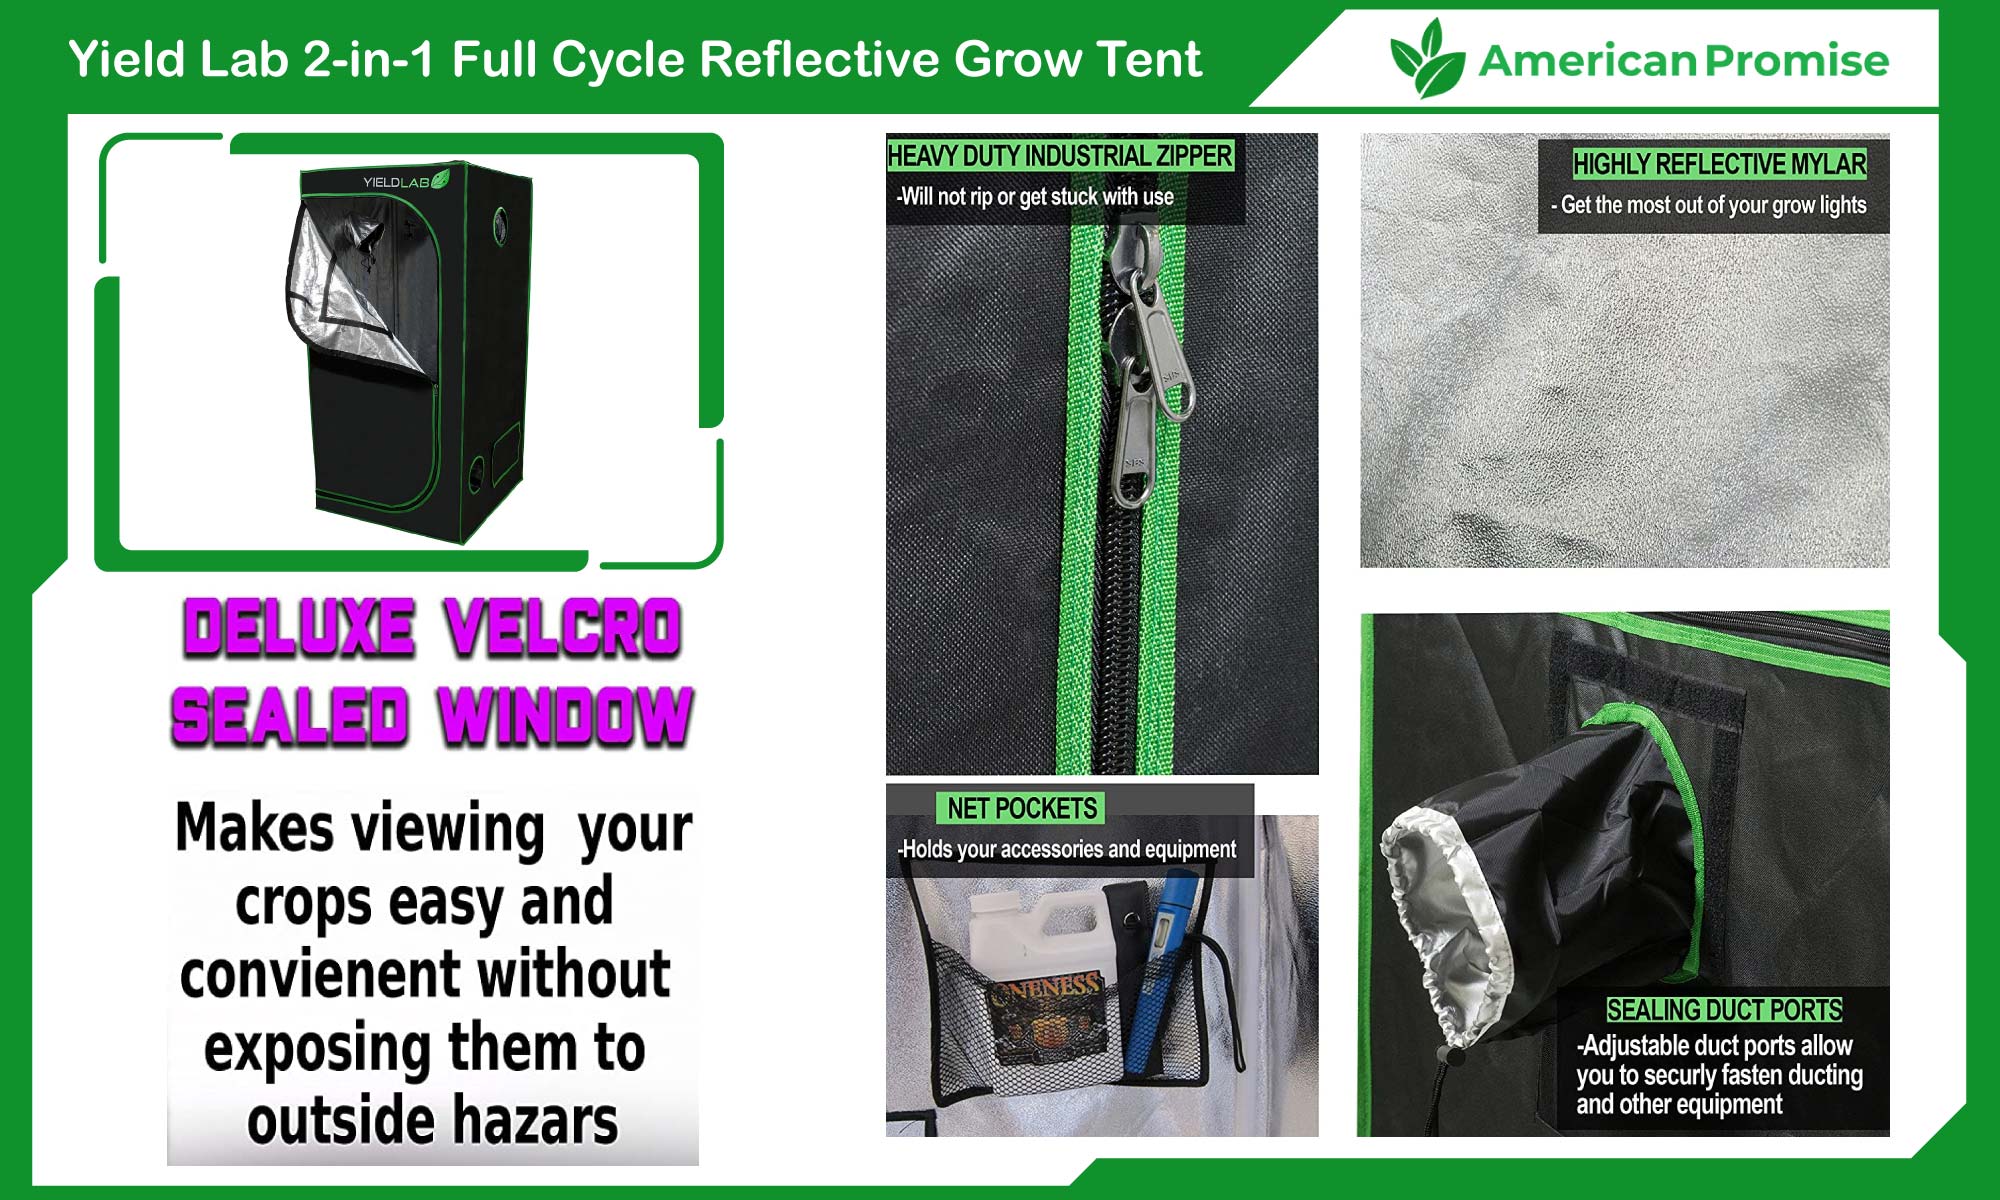 Yield Lab 2-in-1 Full Cycle Reflective